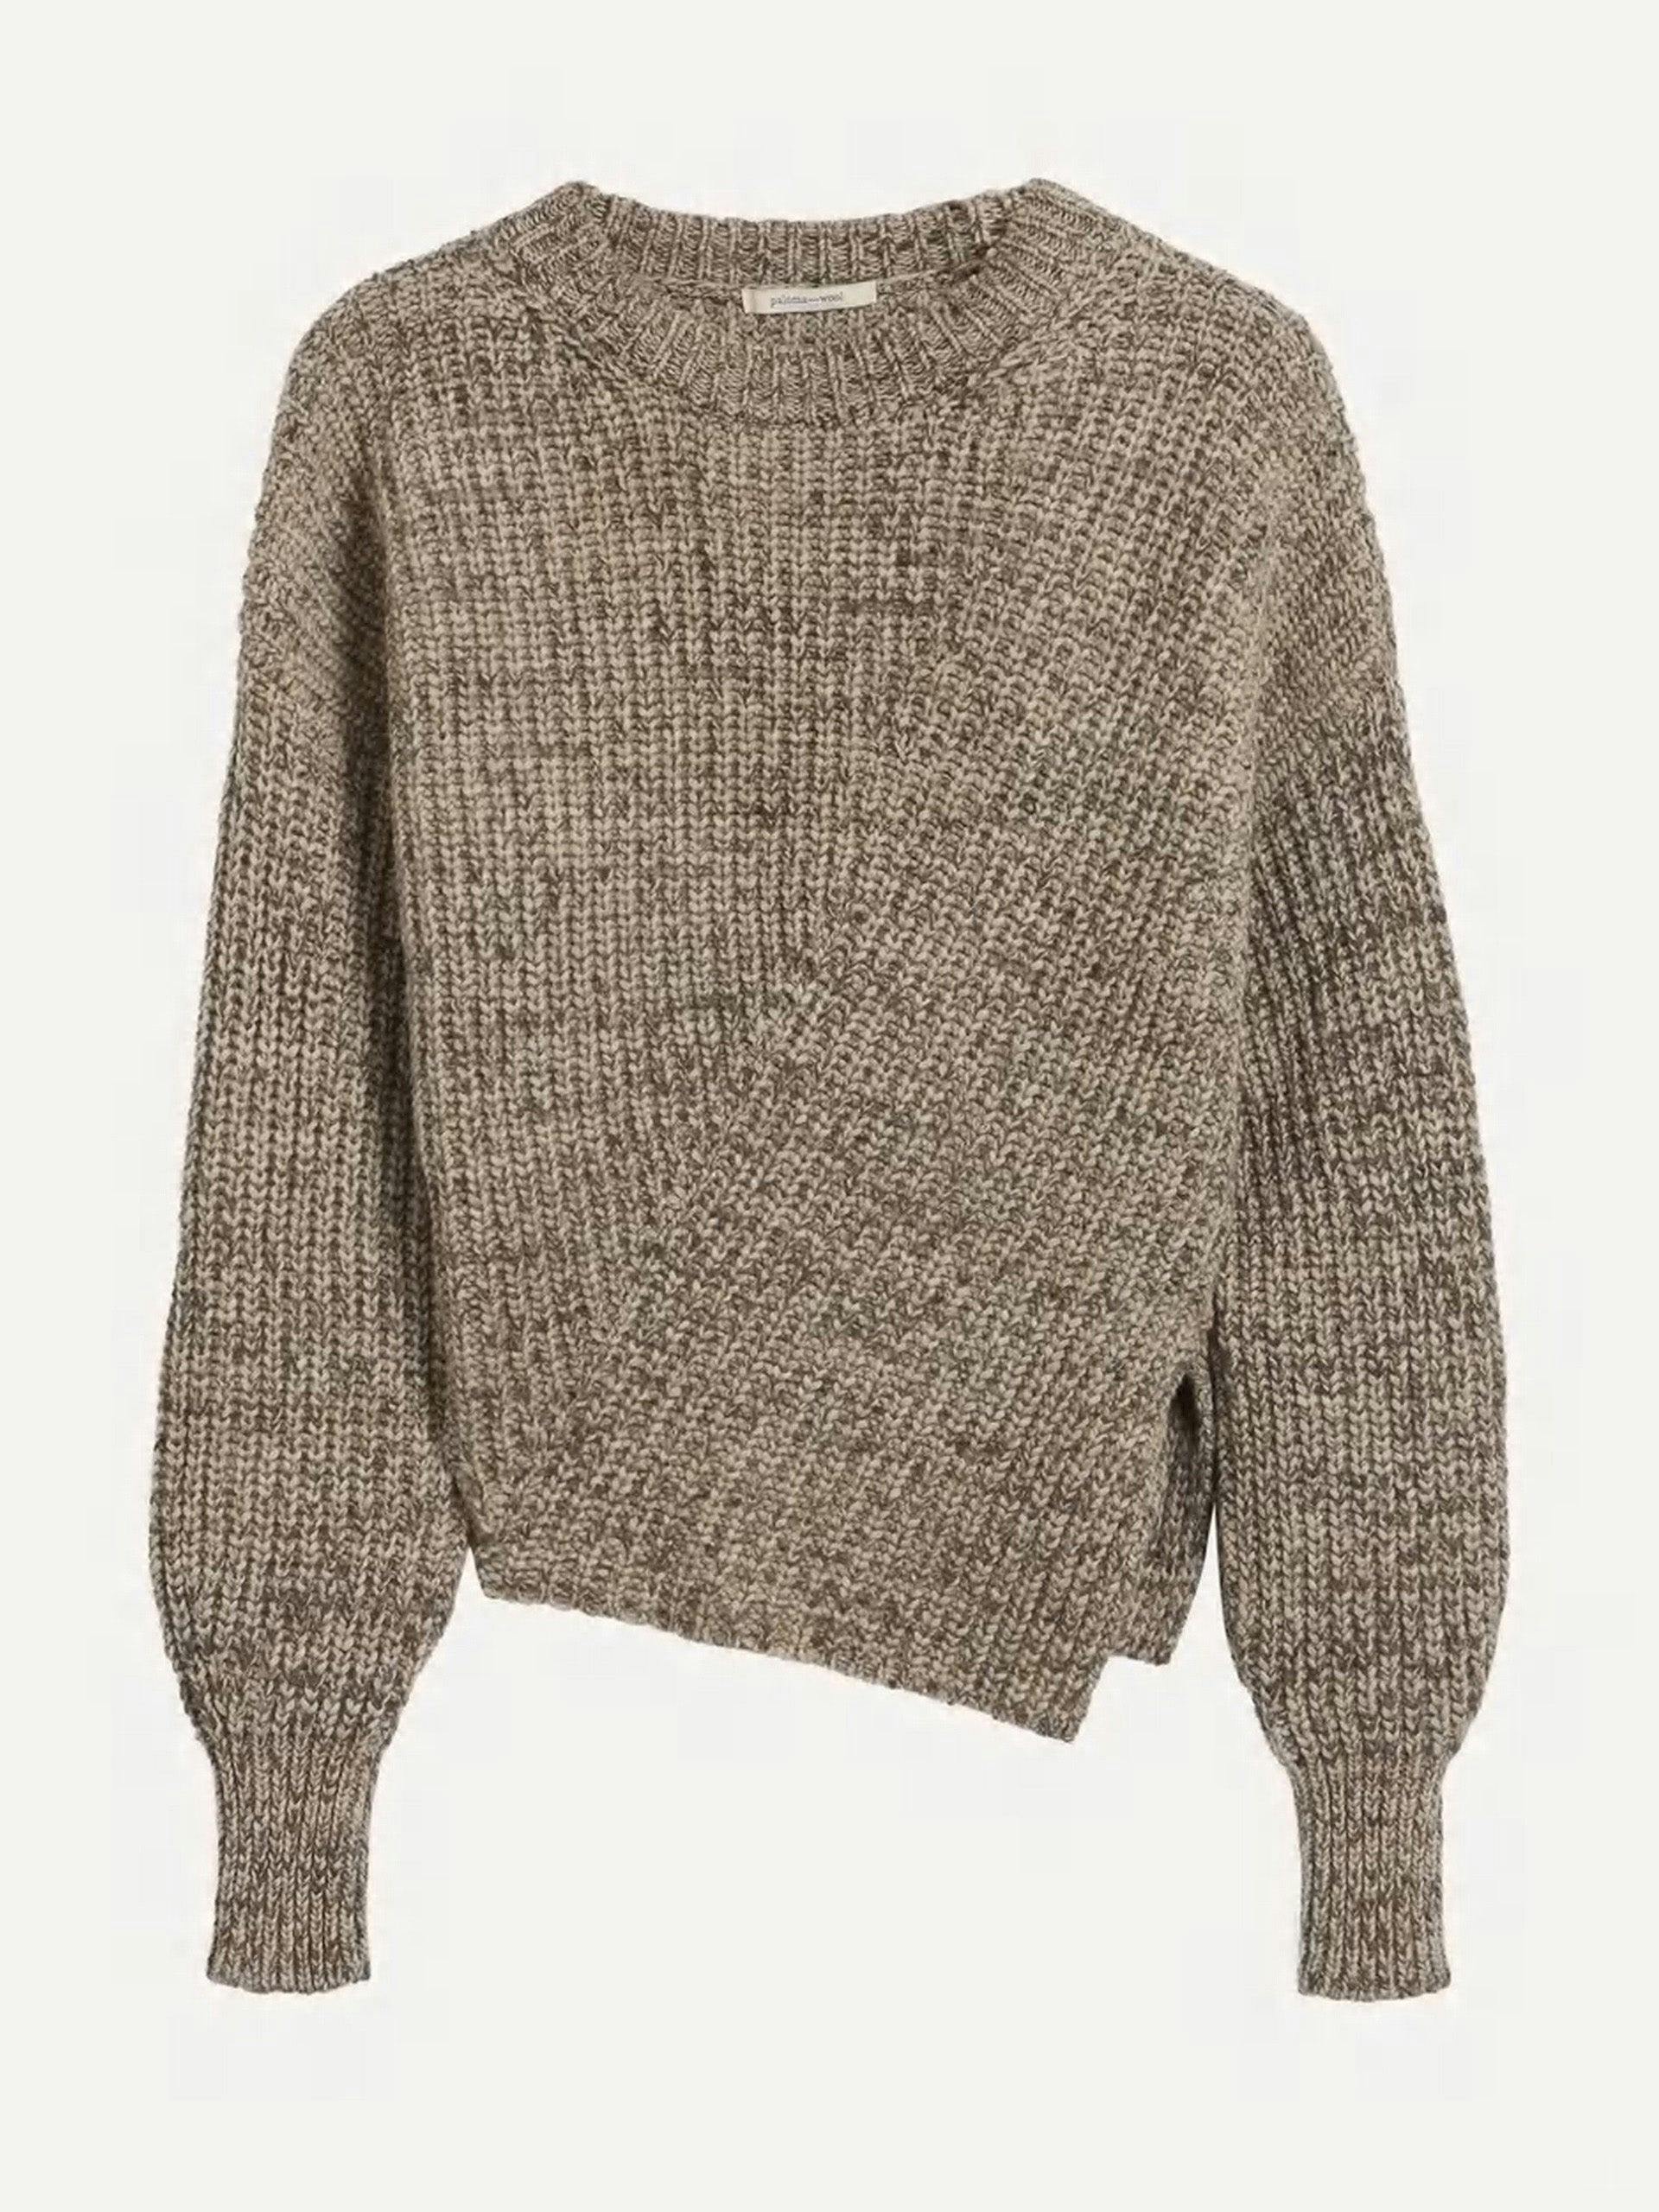 Diago knitted jumper